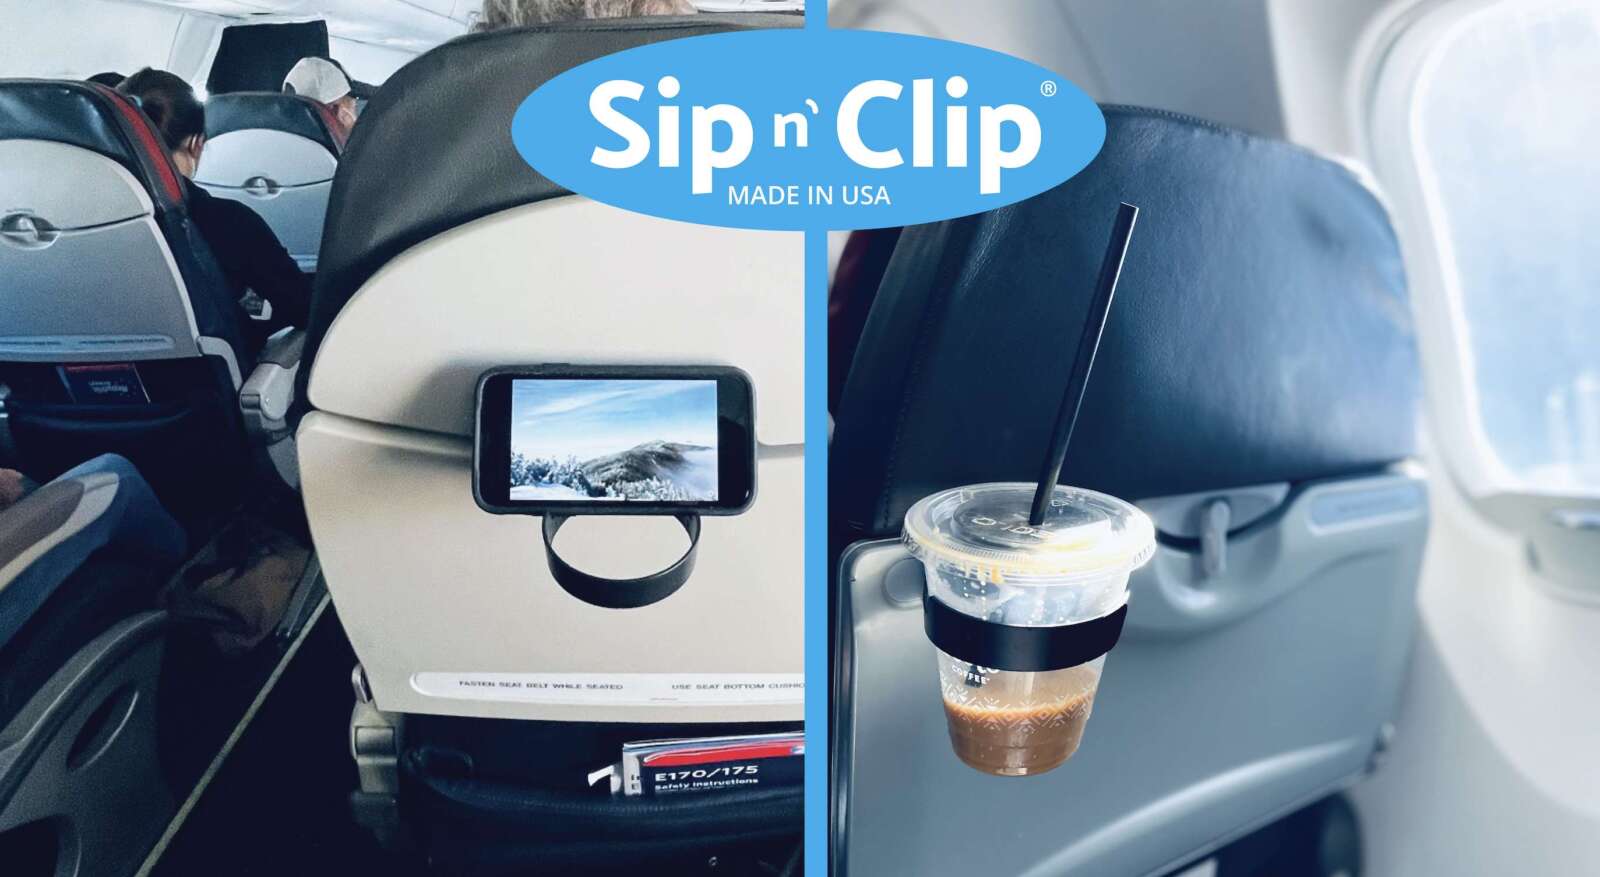 Portable airplane seat cup holder Sip N' Clip takes off on  and at  airports